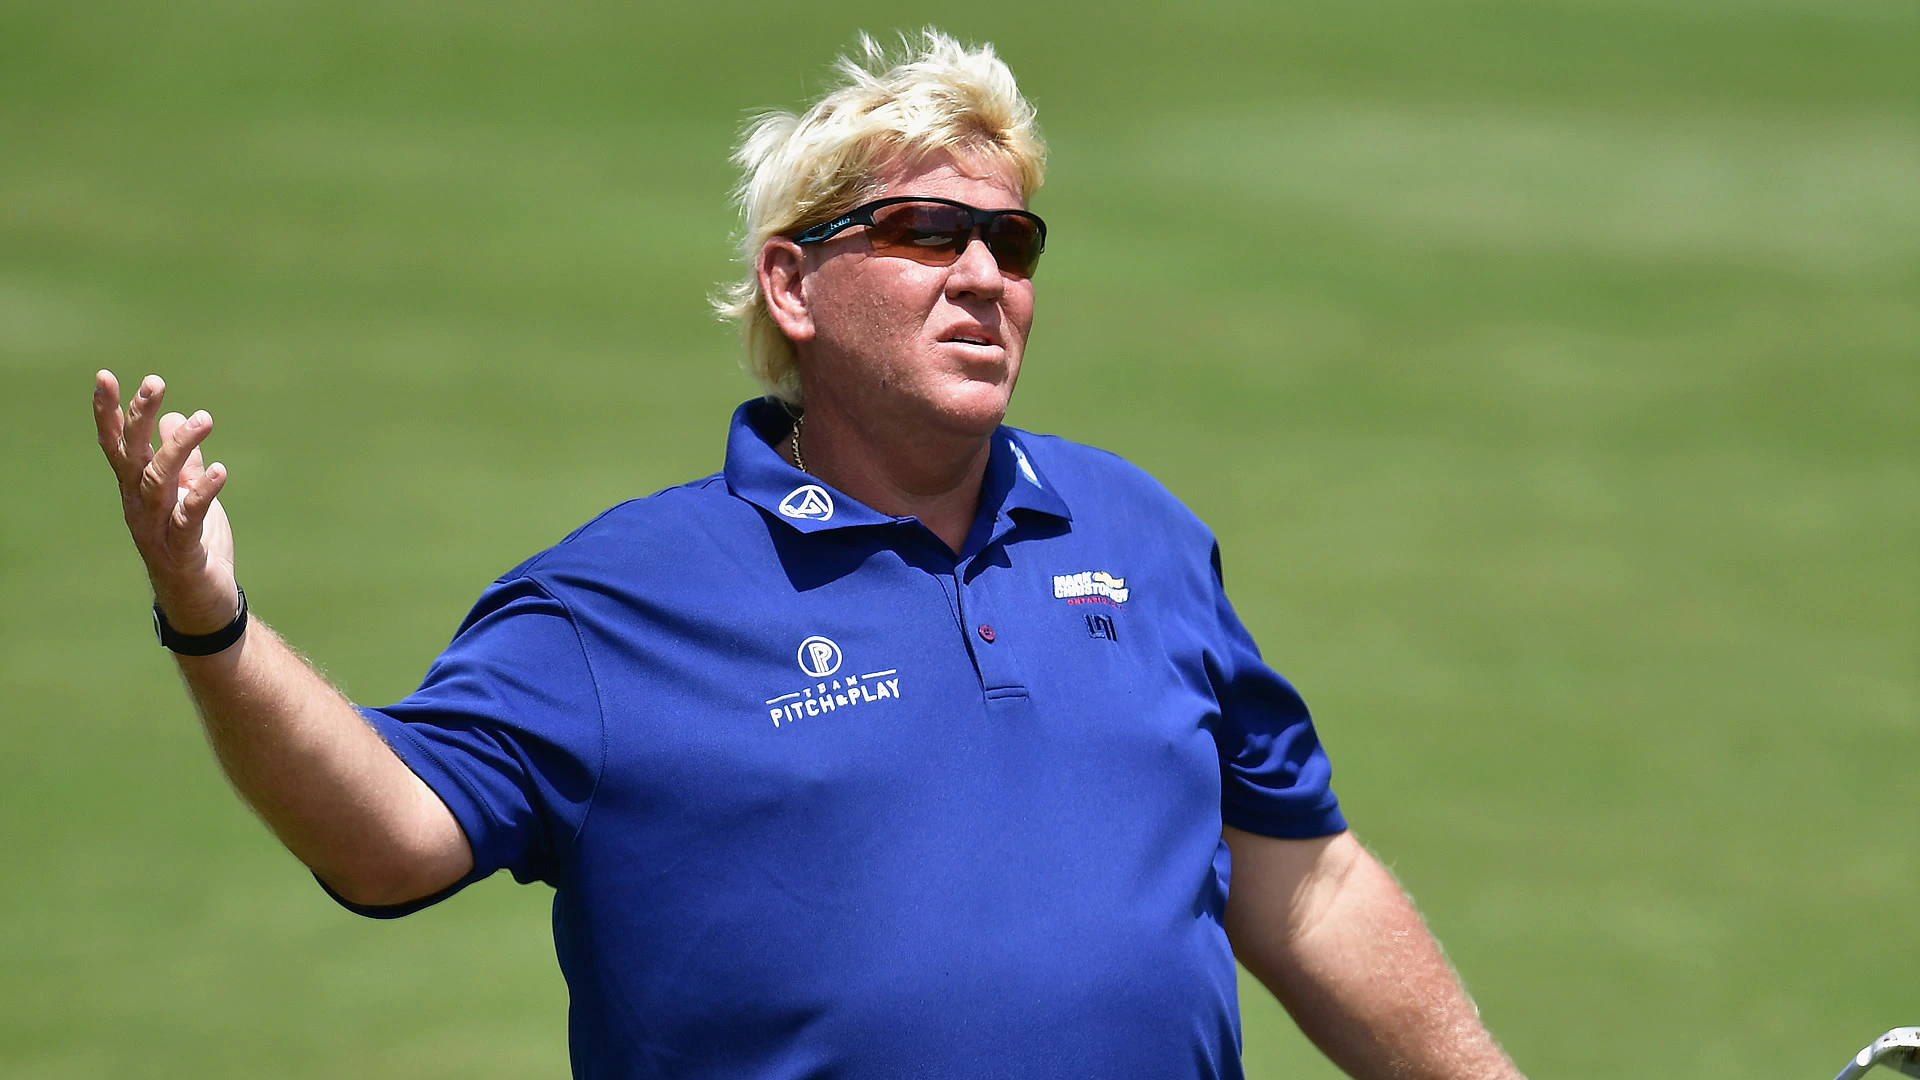 Daly WDs from U.S. Sr. Open, blames USGA for denying cart request